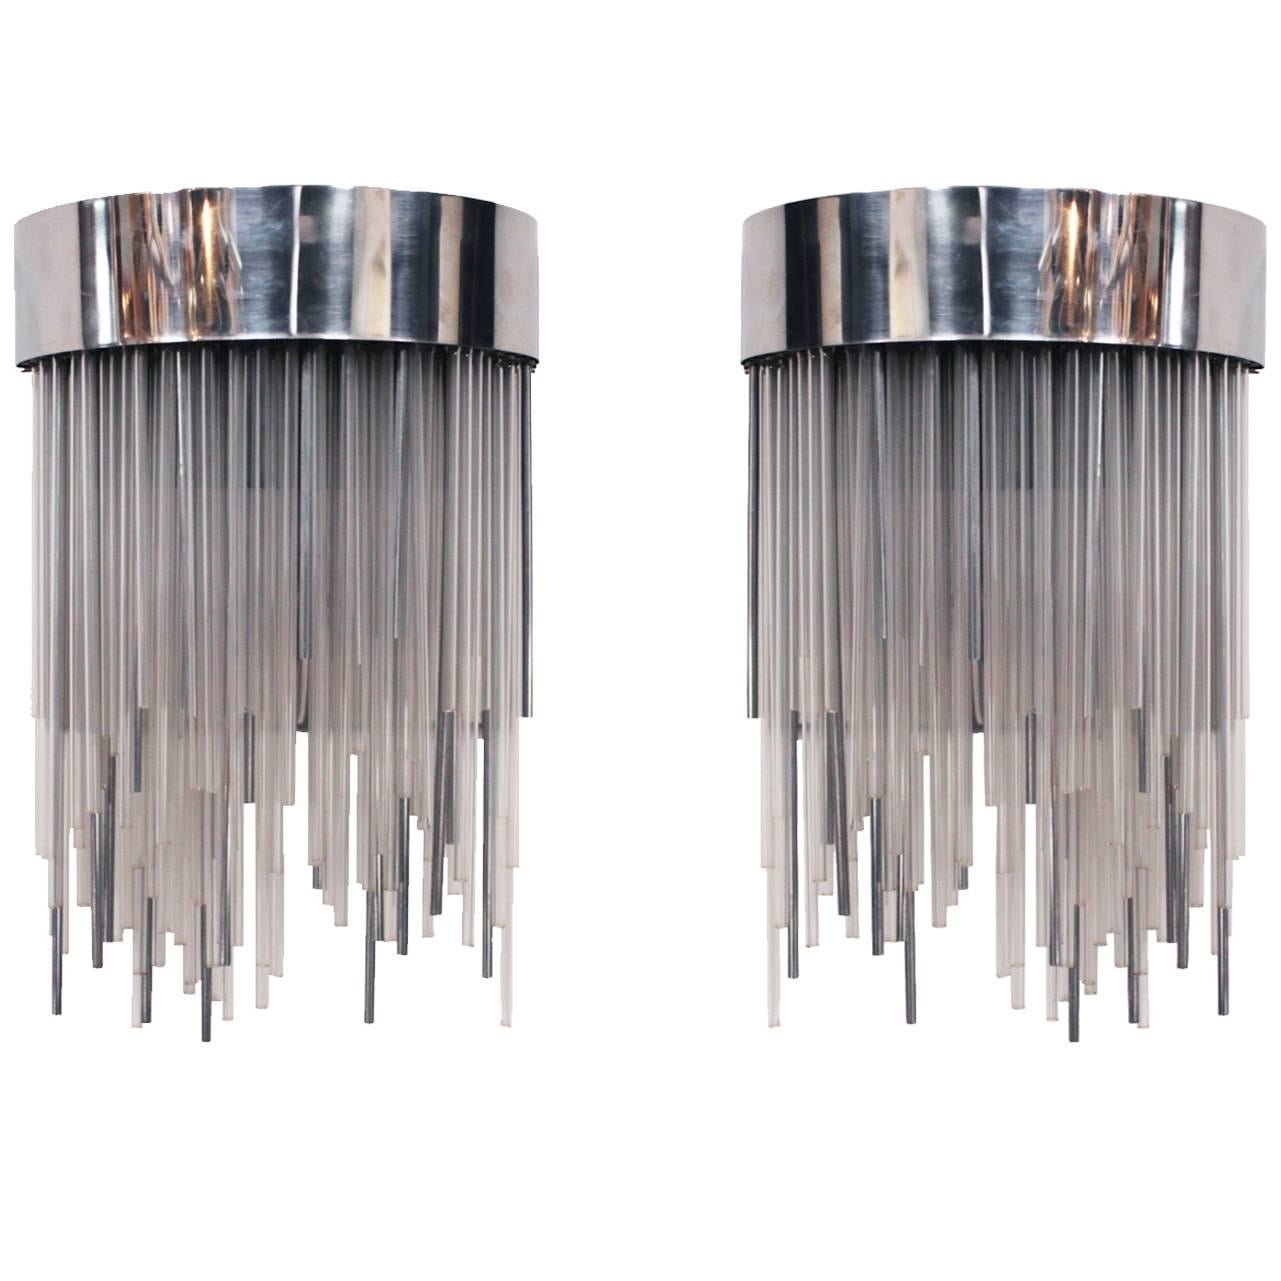 Pair of Glass and Steel Italian Sconces